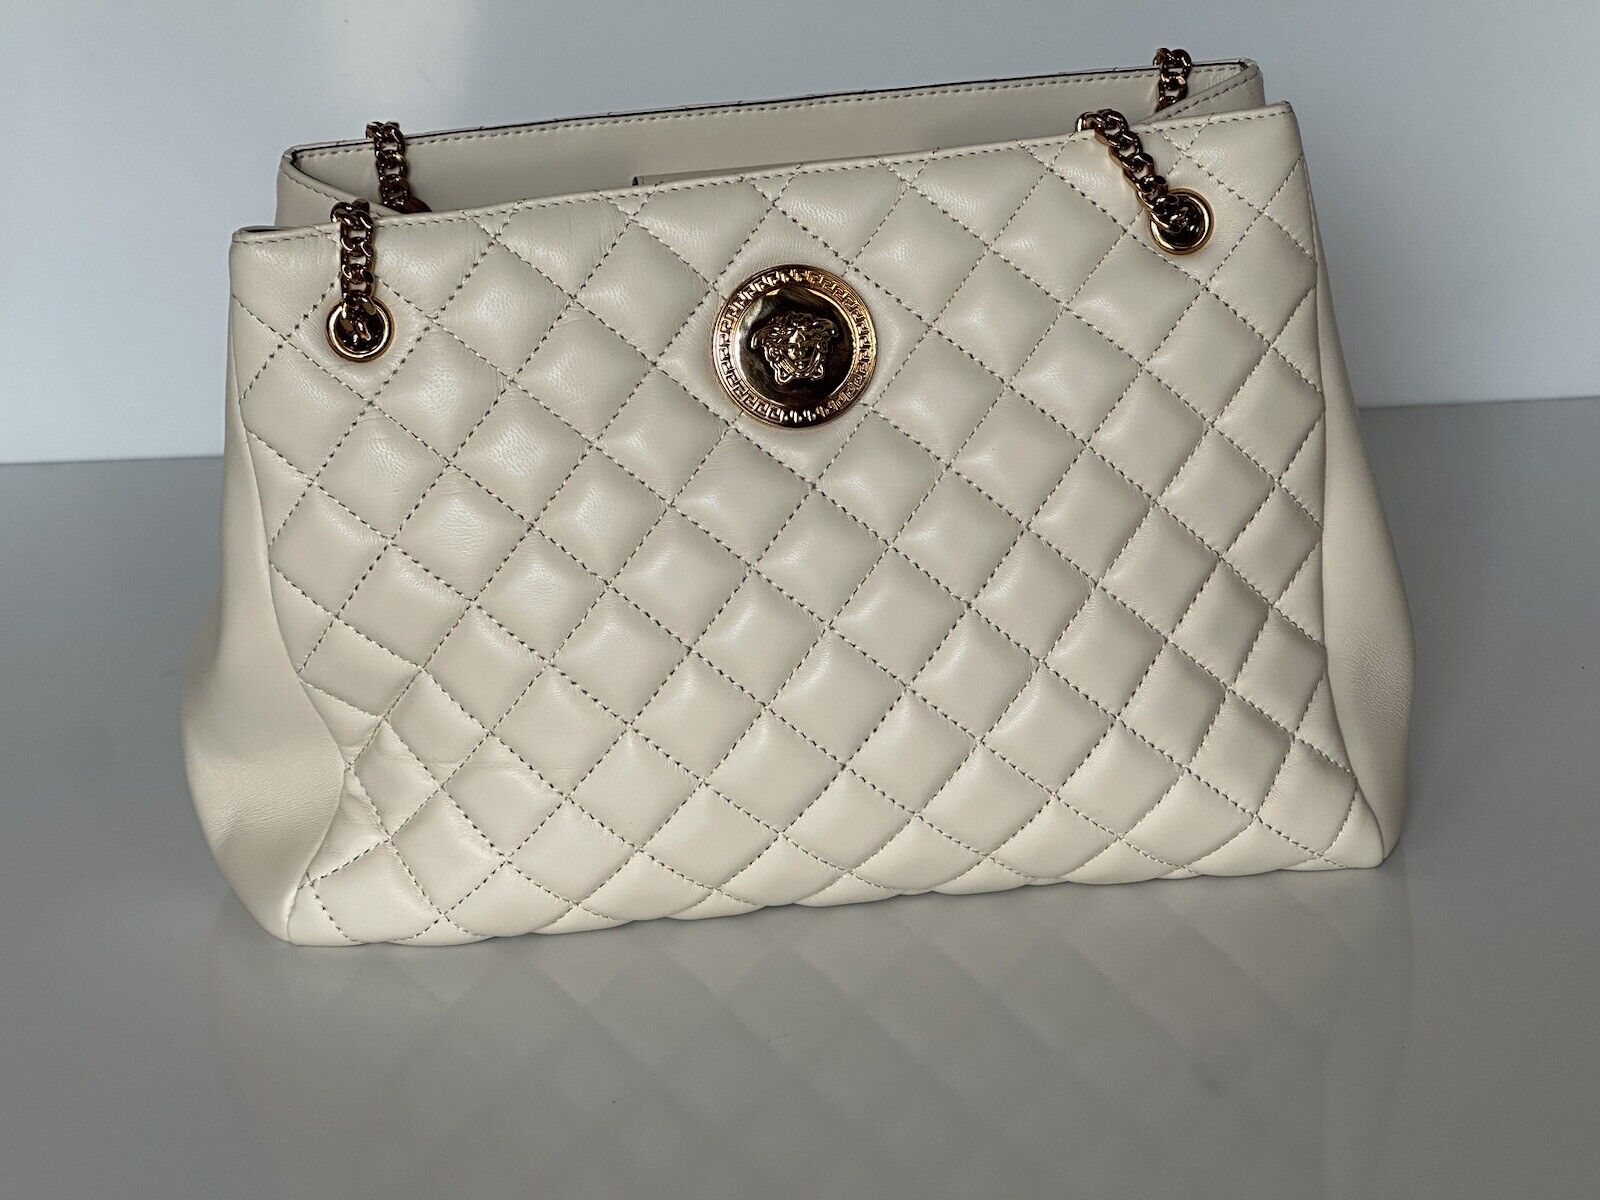 NWT $2100 Versace Evening Quilted Lamb Leather Med Cream Shoulder Bag 1006176 IT